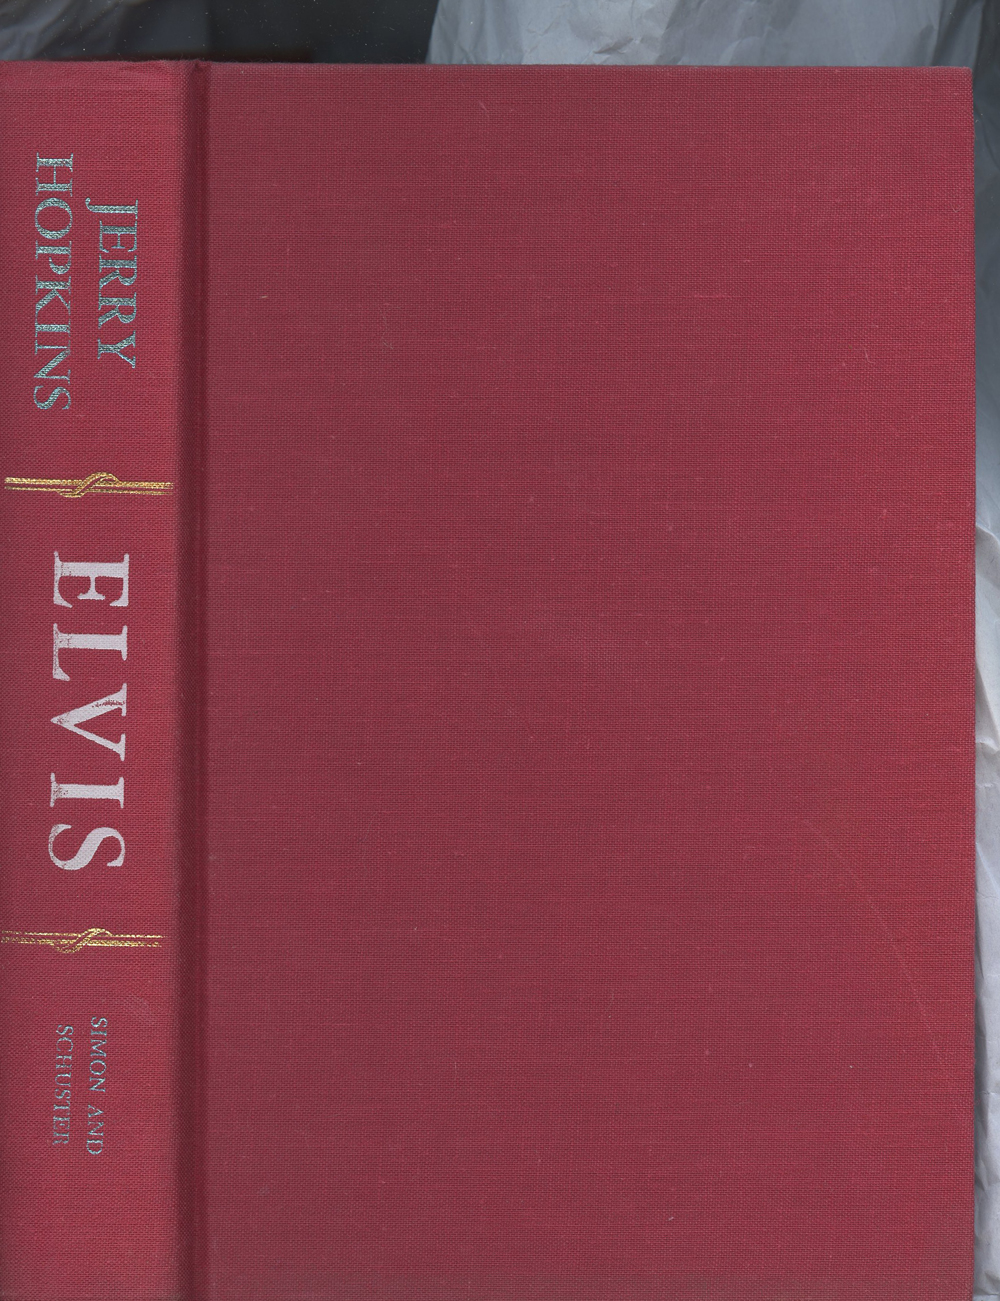 Elvis Presley Book A Biography Hard Cover First Edition 1971 Jerry Hopkins